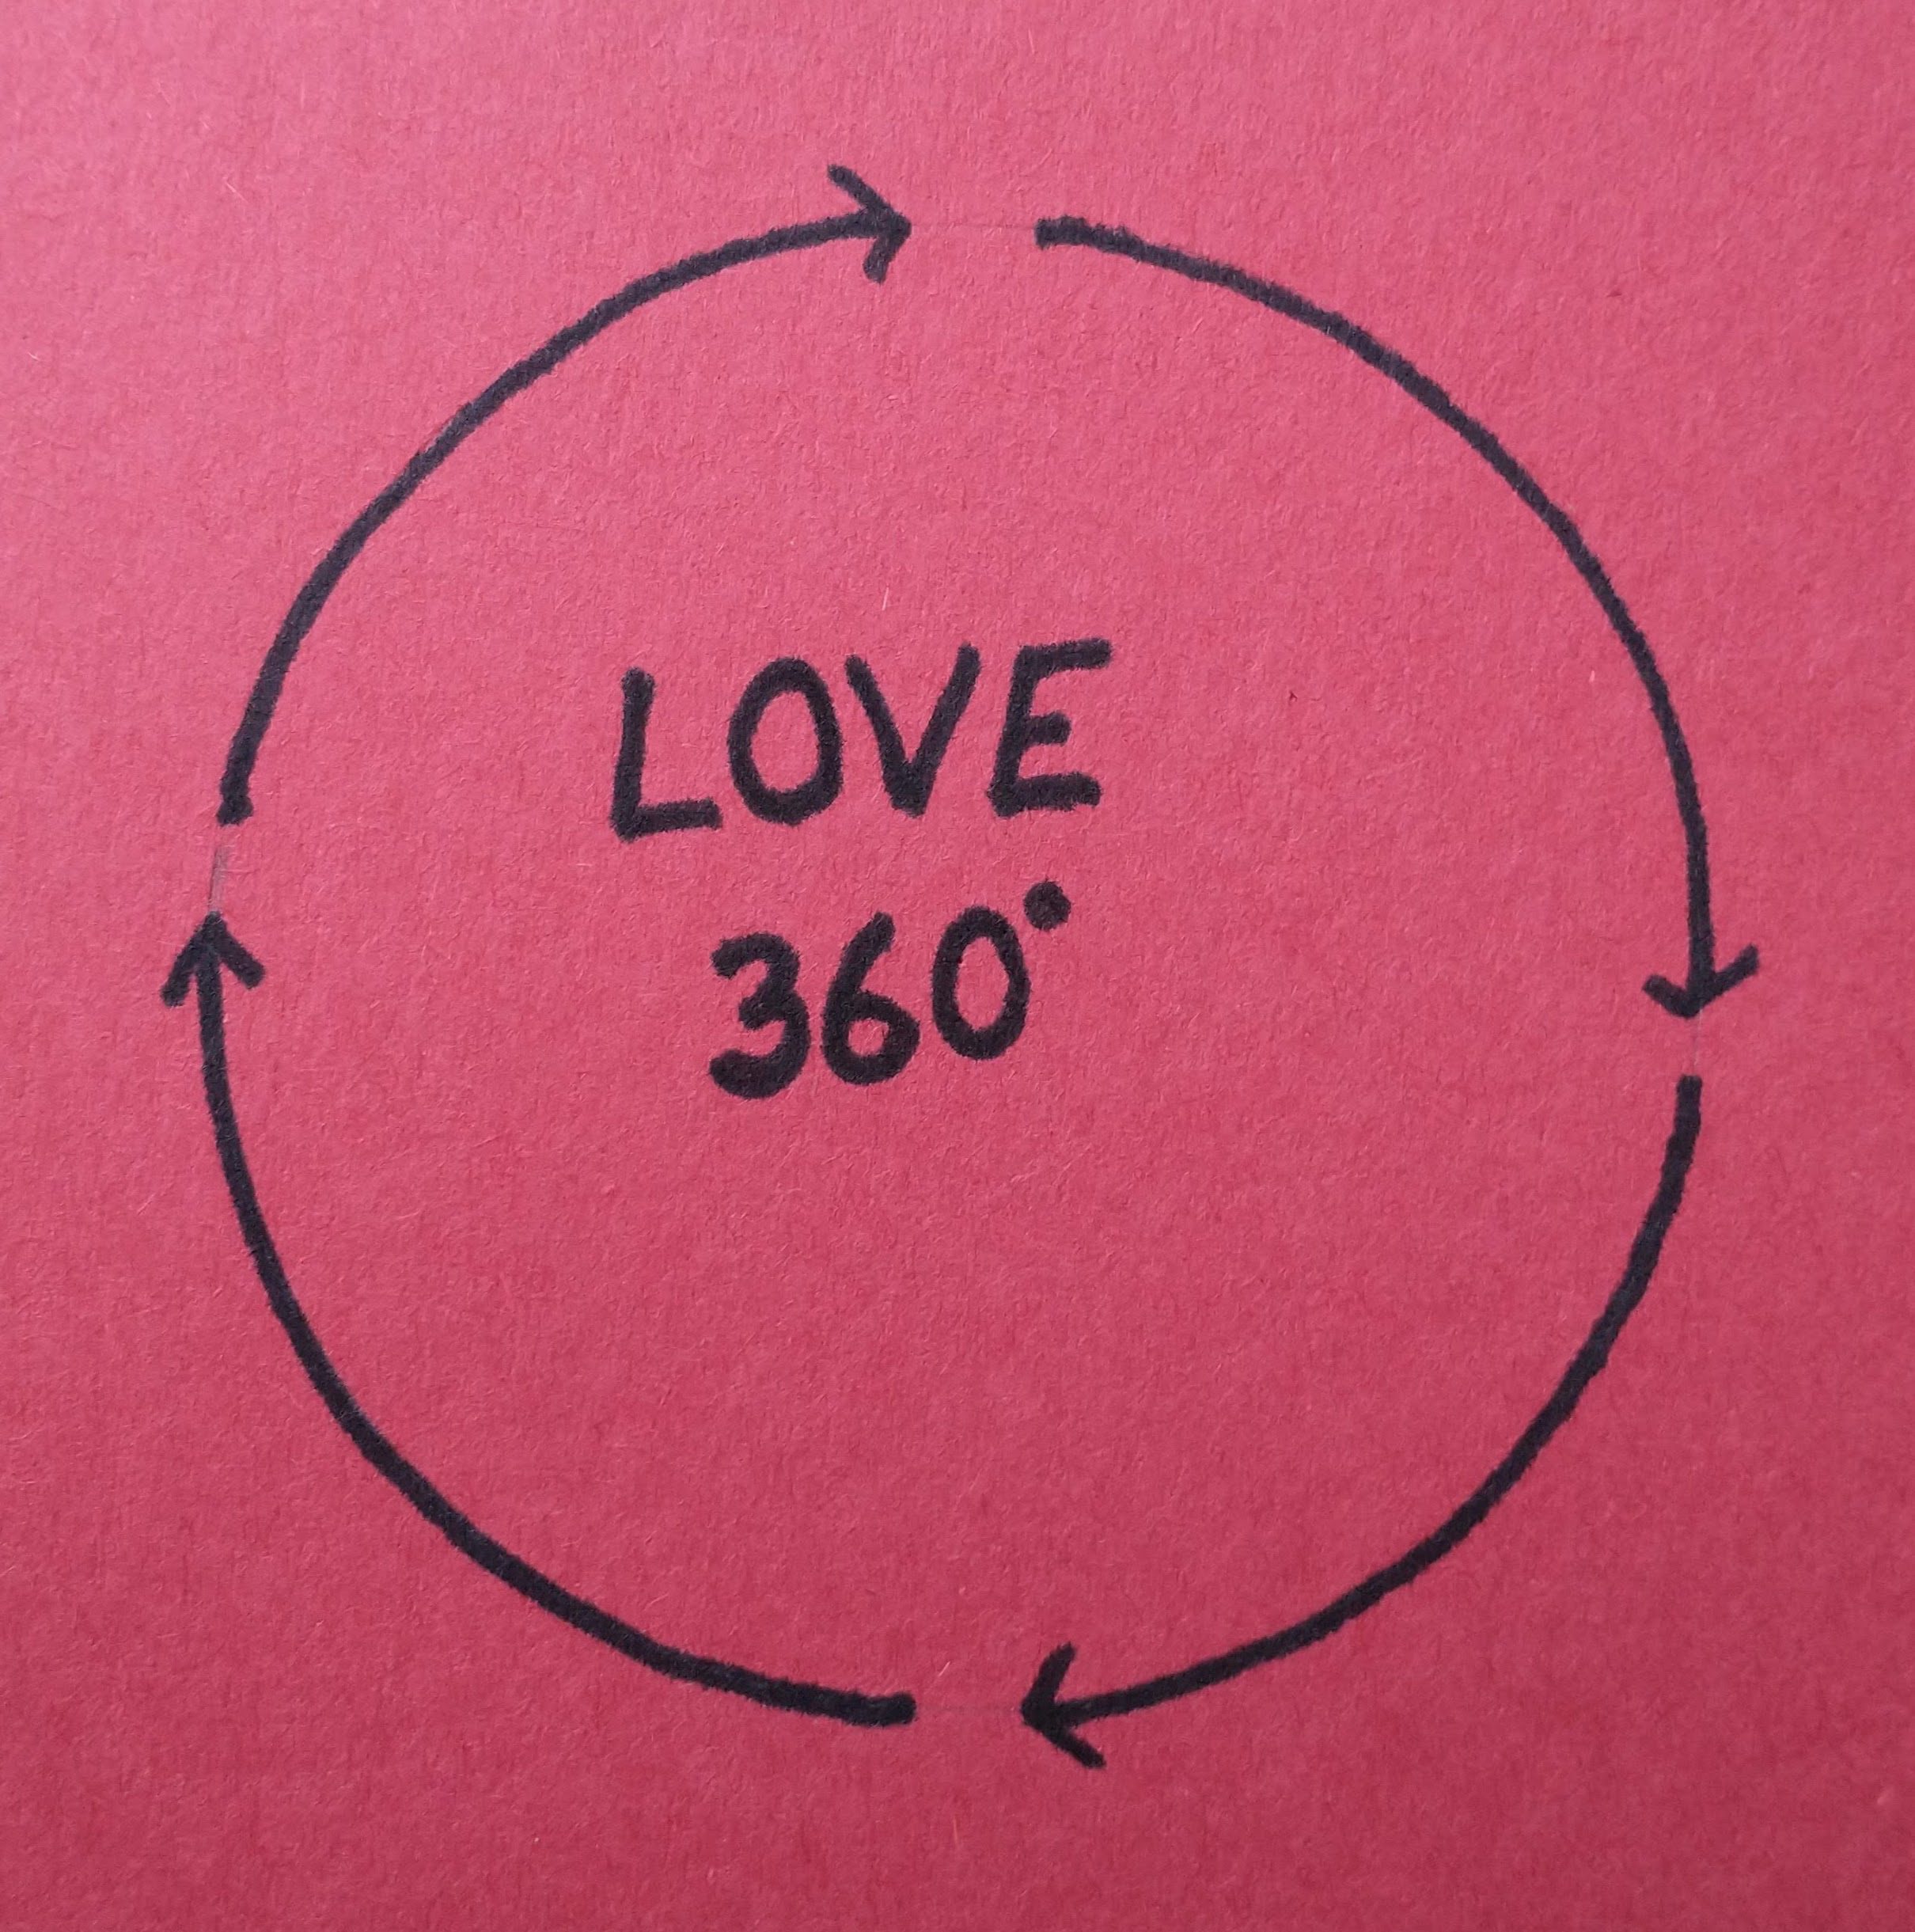 to show the circular nature of Love 360